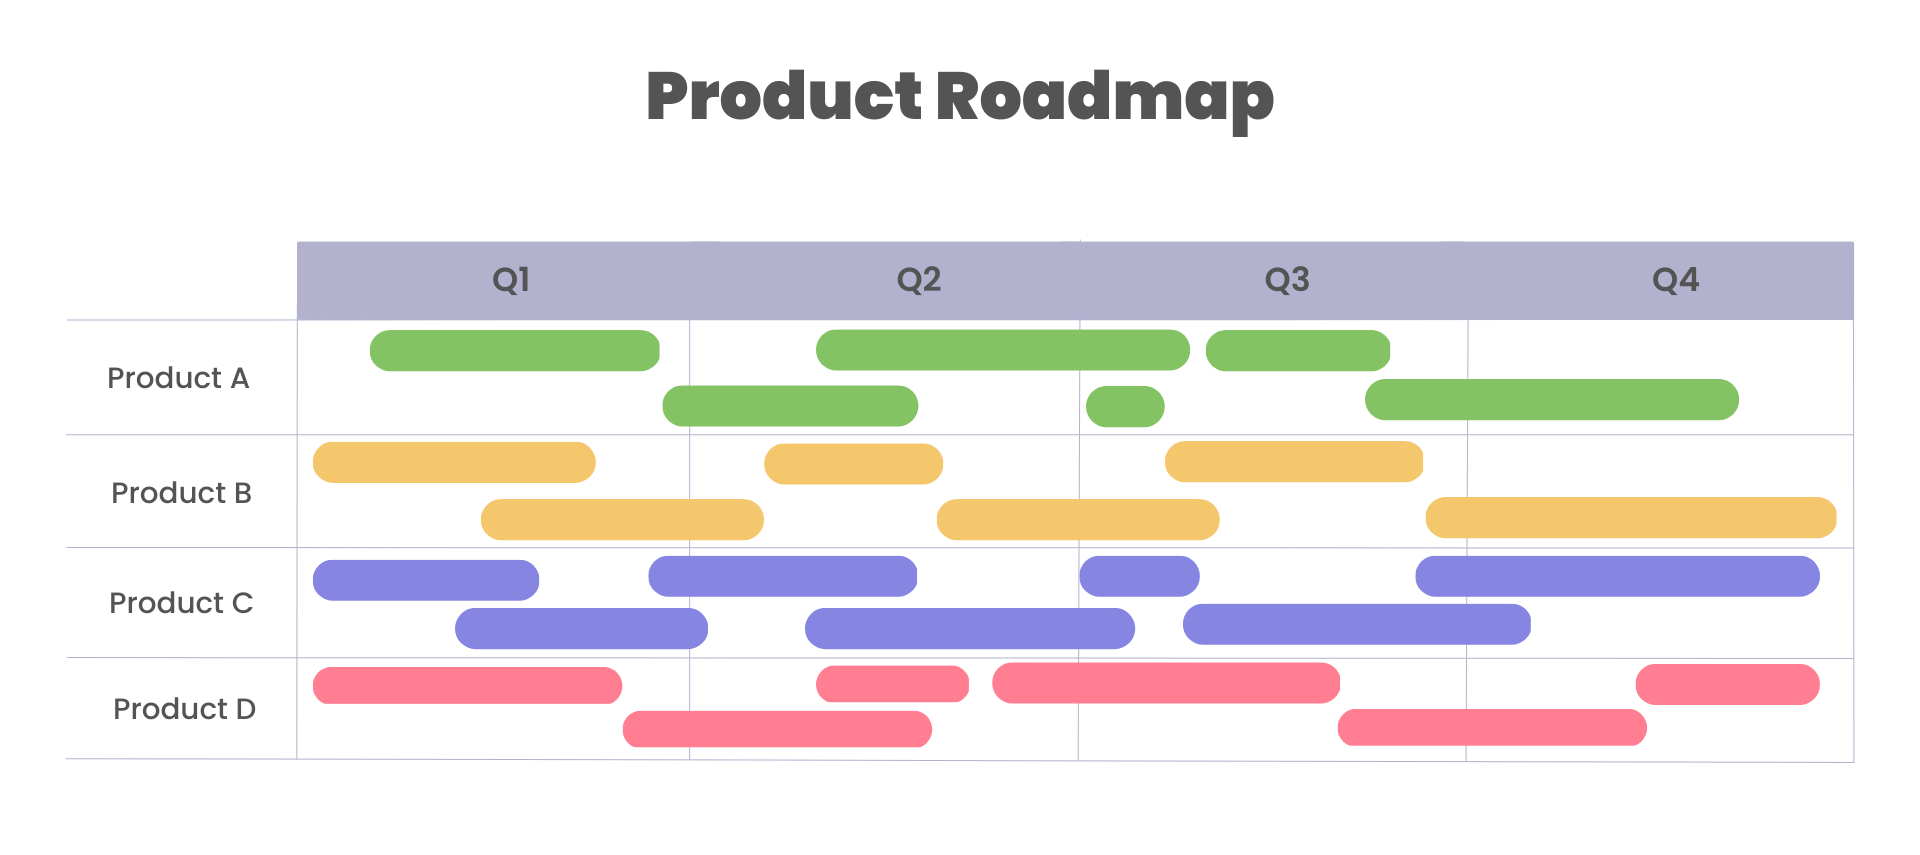 Product Roadmap for multiple Program Increments